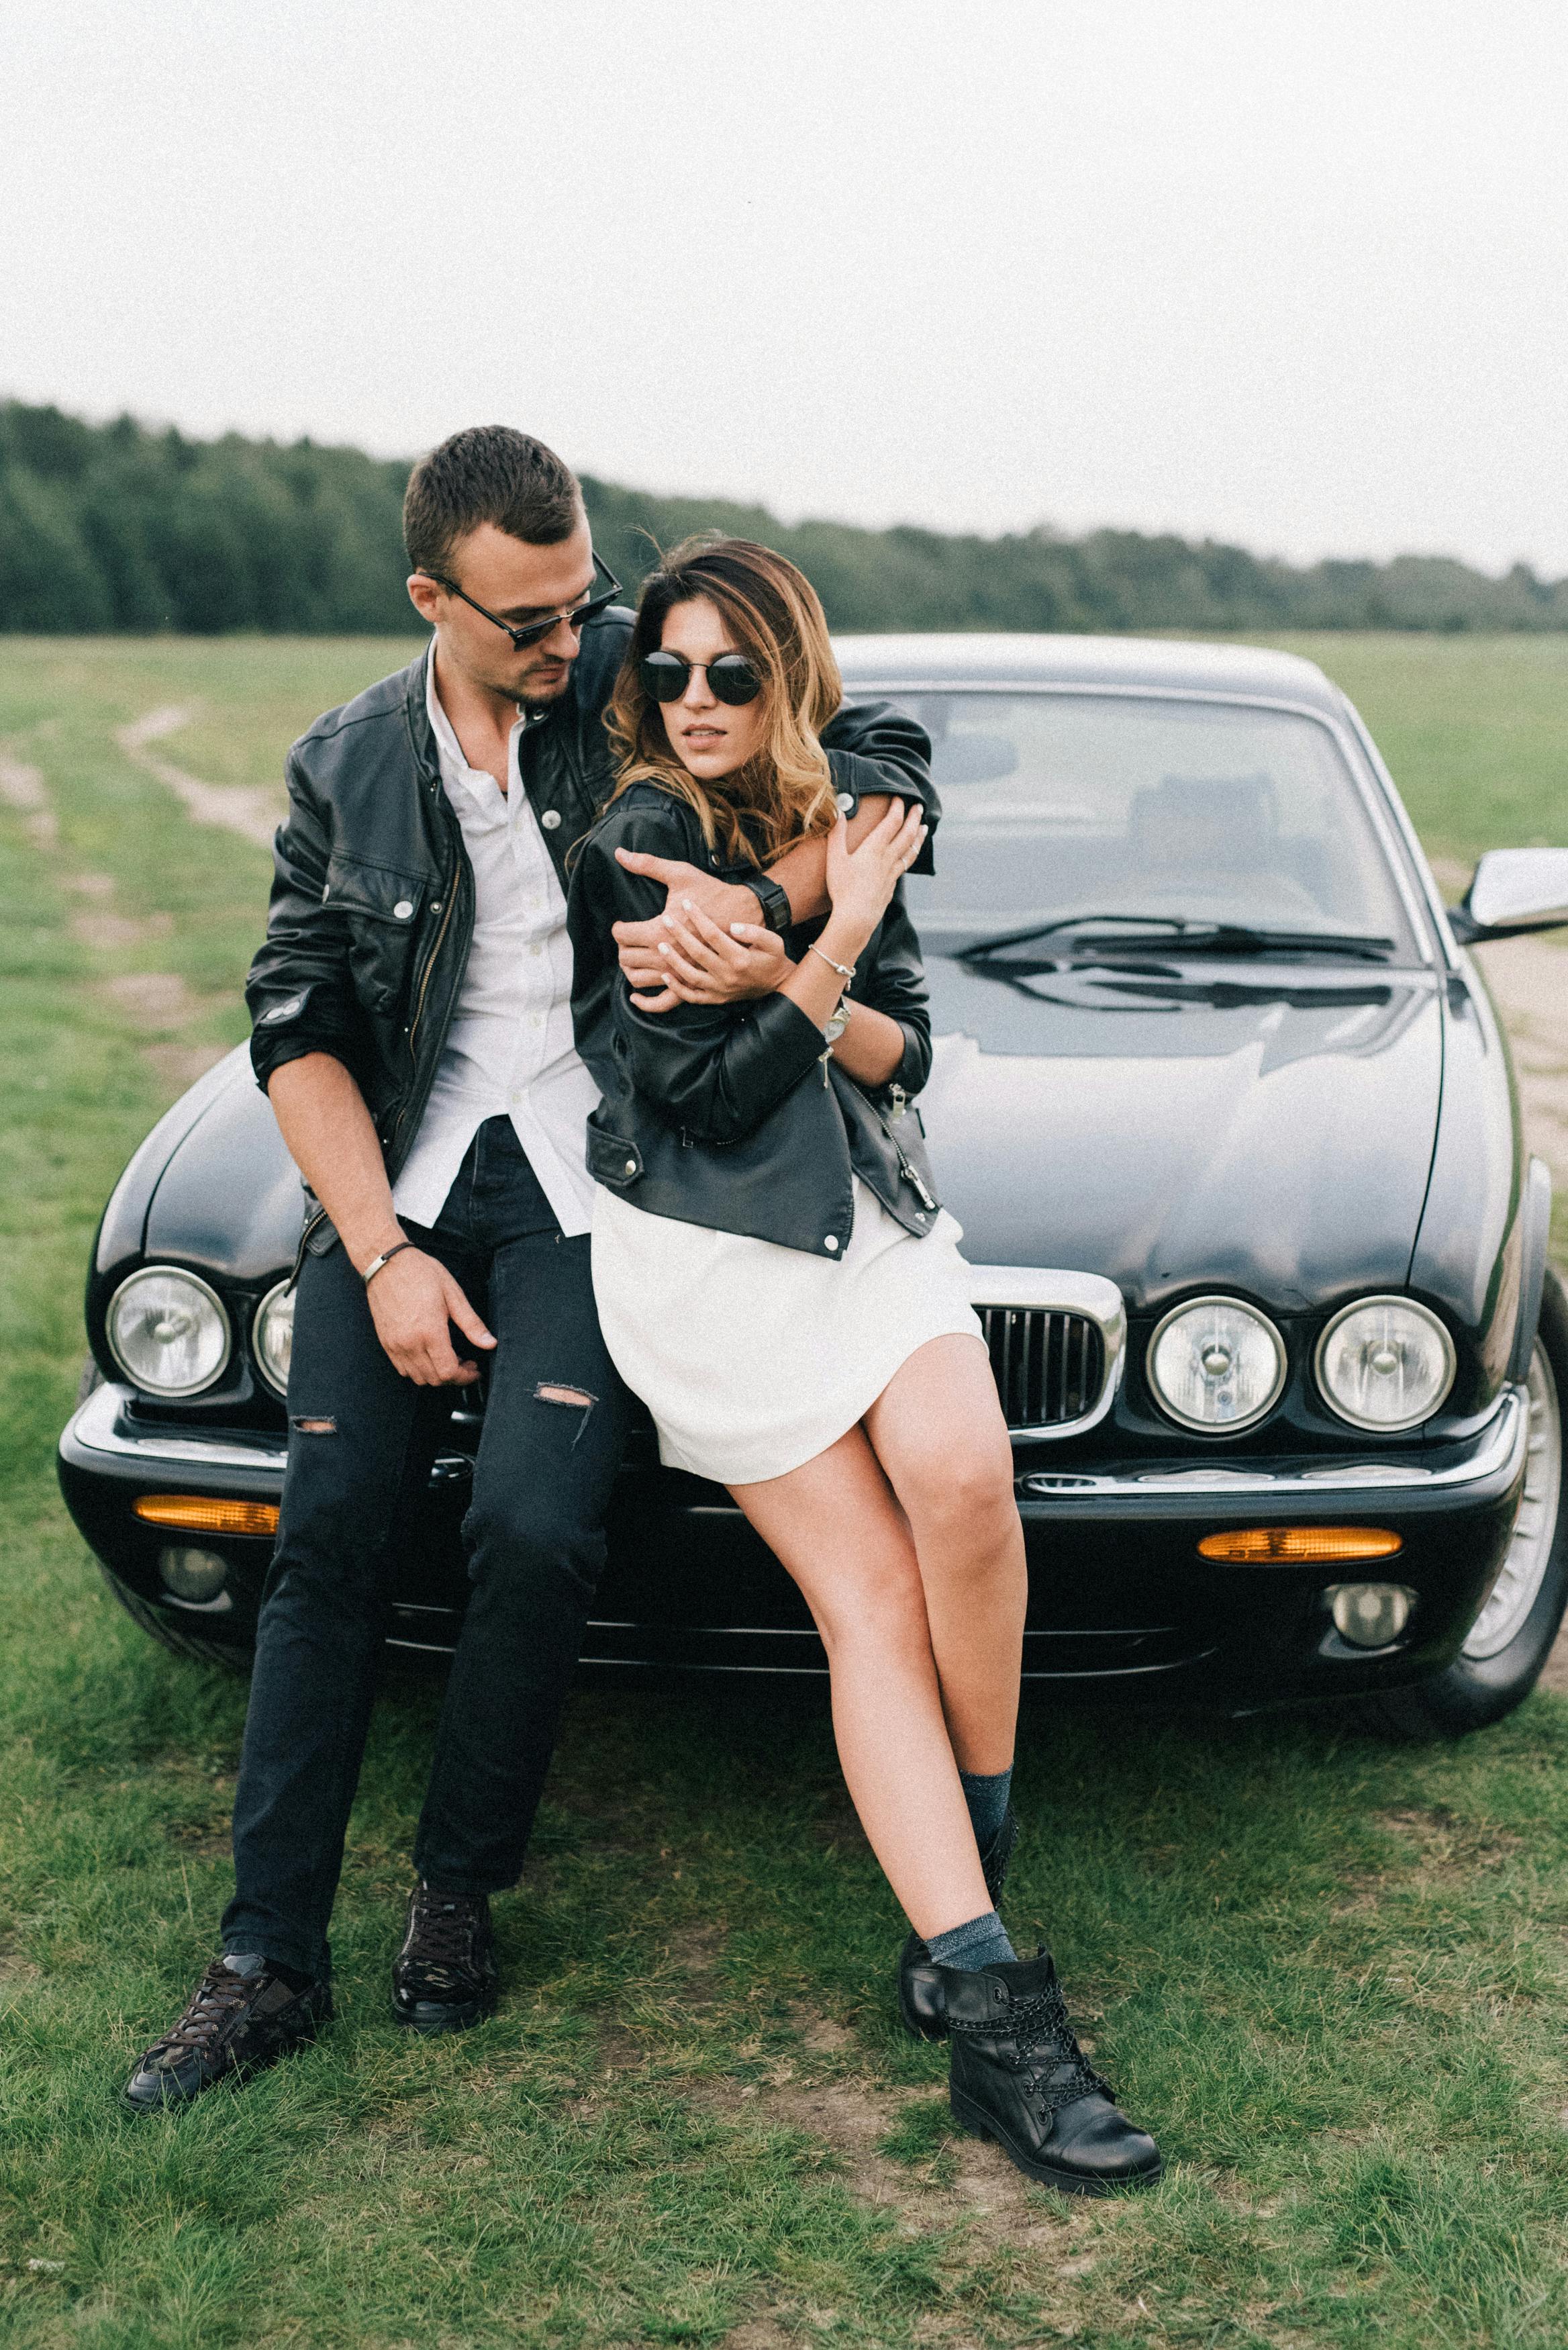 500+ Car Couple Pictures | Download Free Images on Unsplash